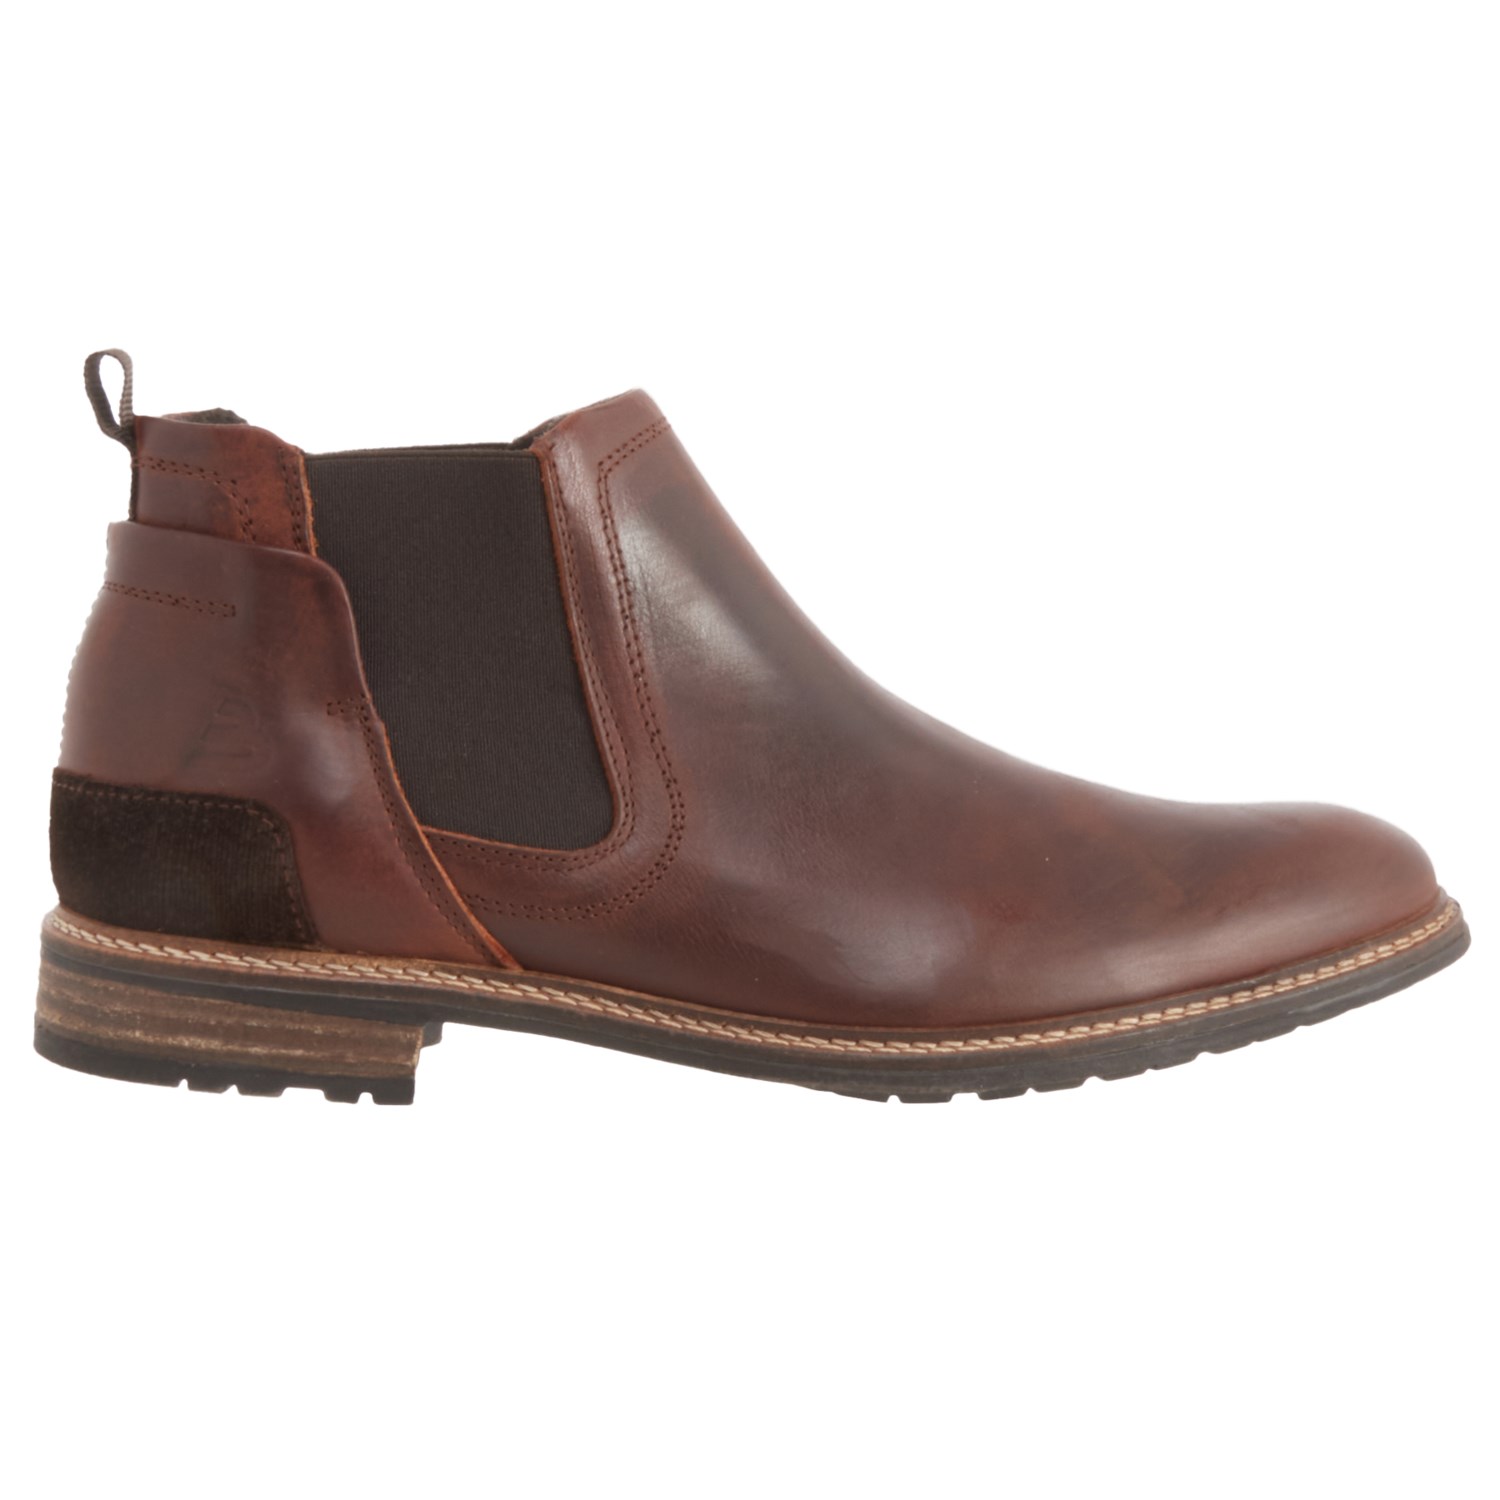 BULLBOXER Made in Portugal Edward Chelsea Boots (For Men) - Save 41%